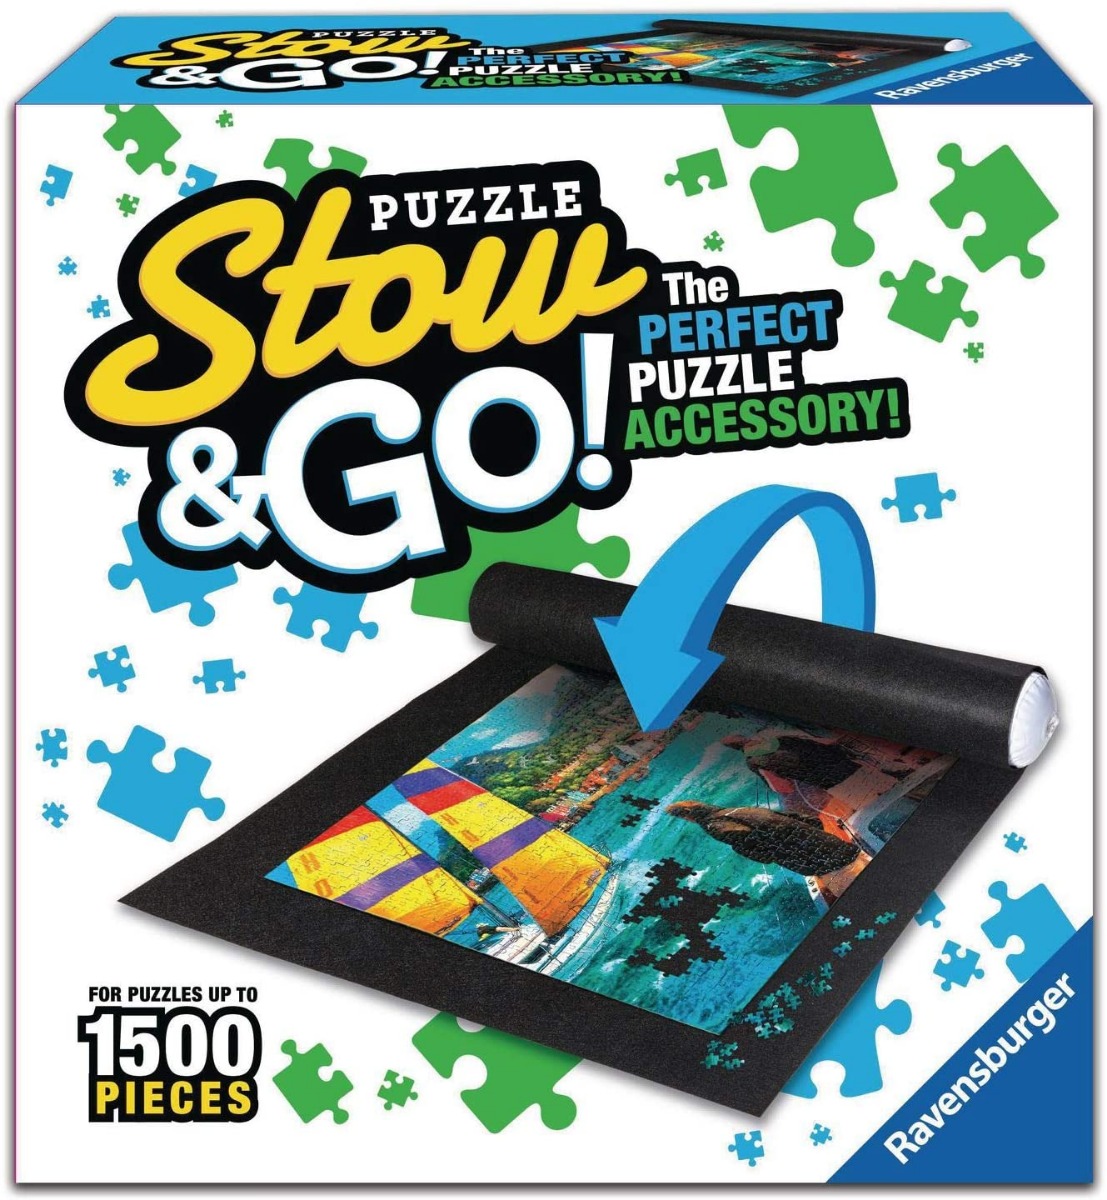 Puzzle Stow & Go by Ravensburger, The Perfect Puzzle Accessory for Up to 1500 Pieces-0